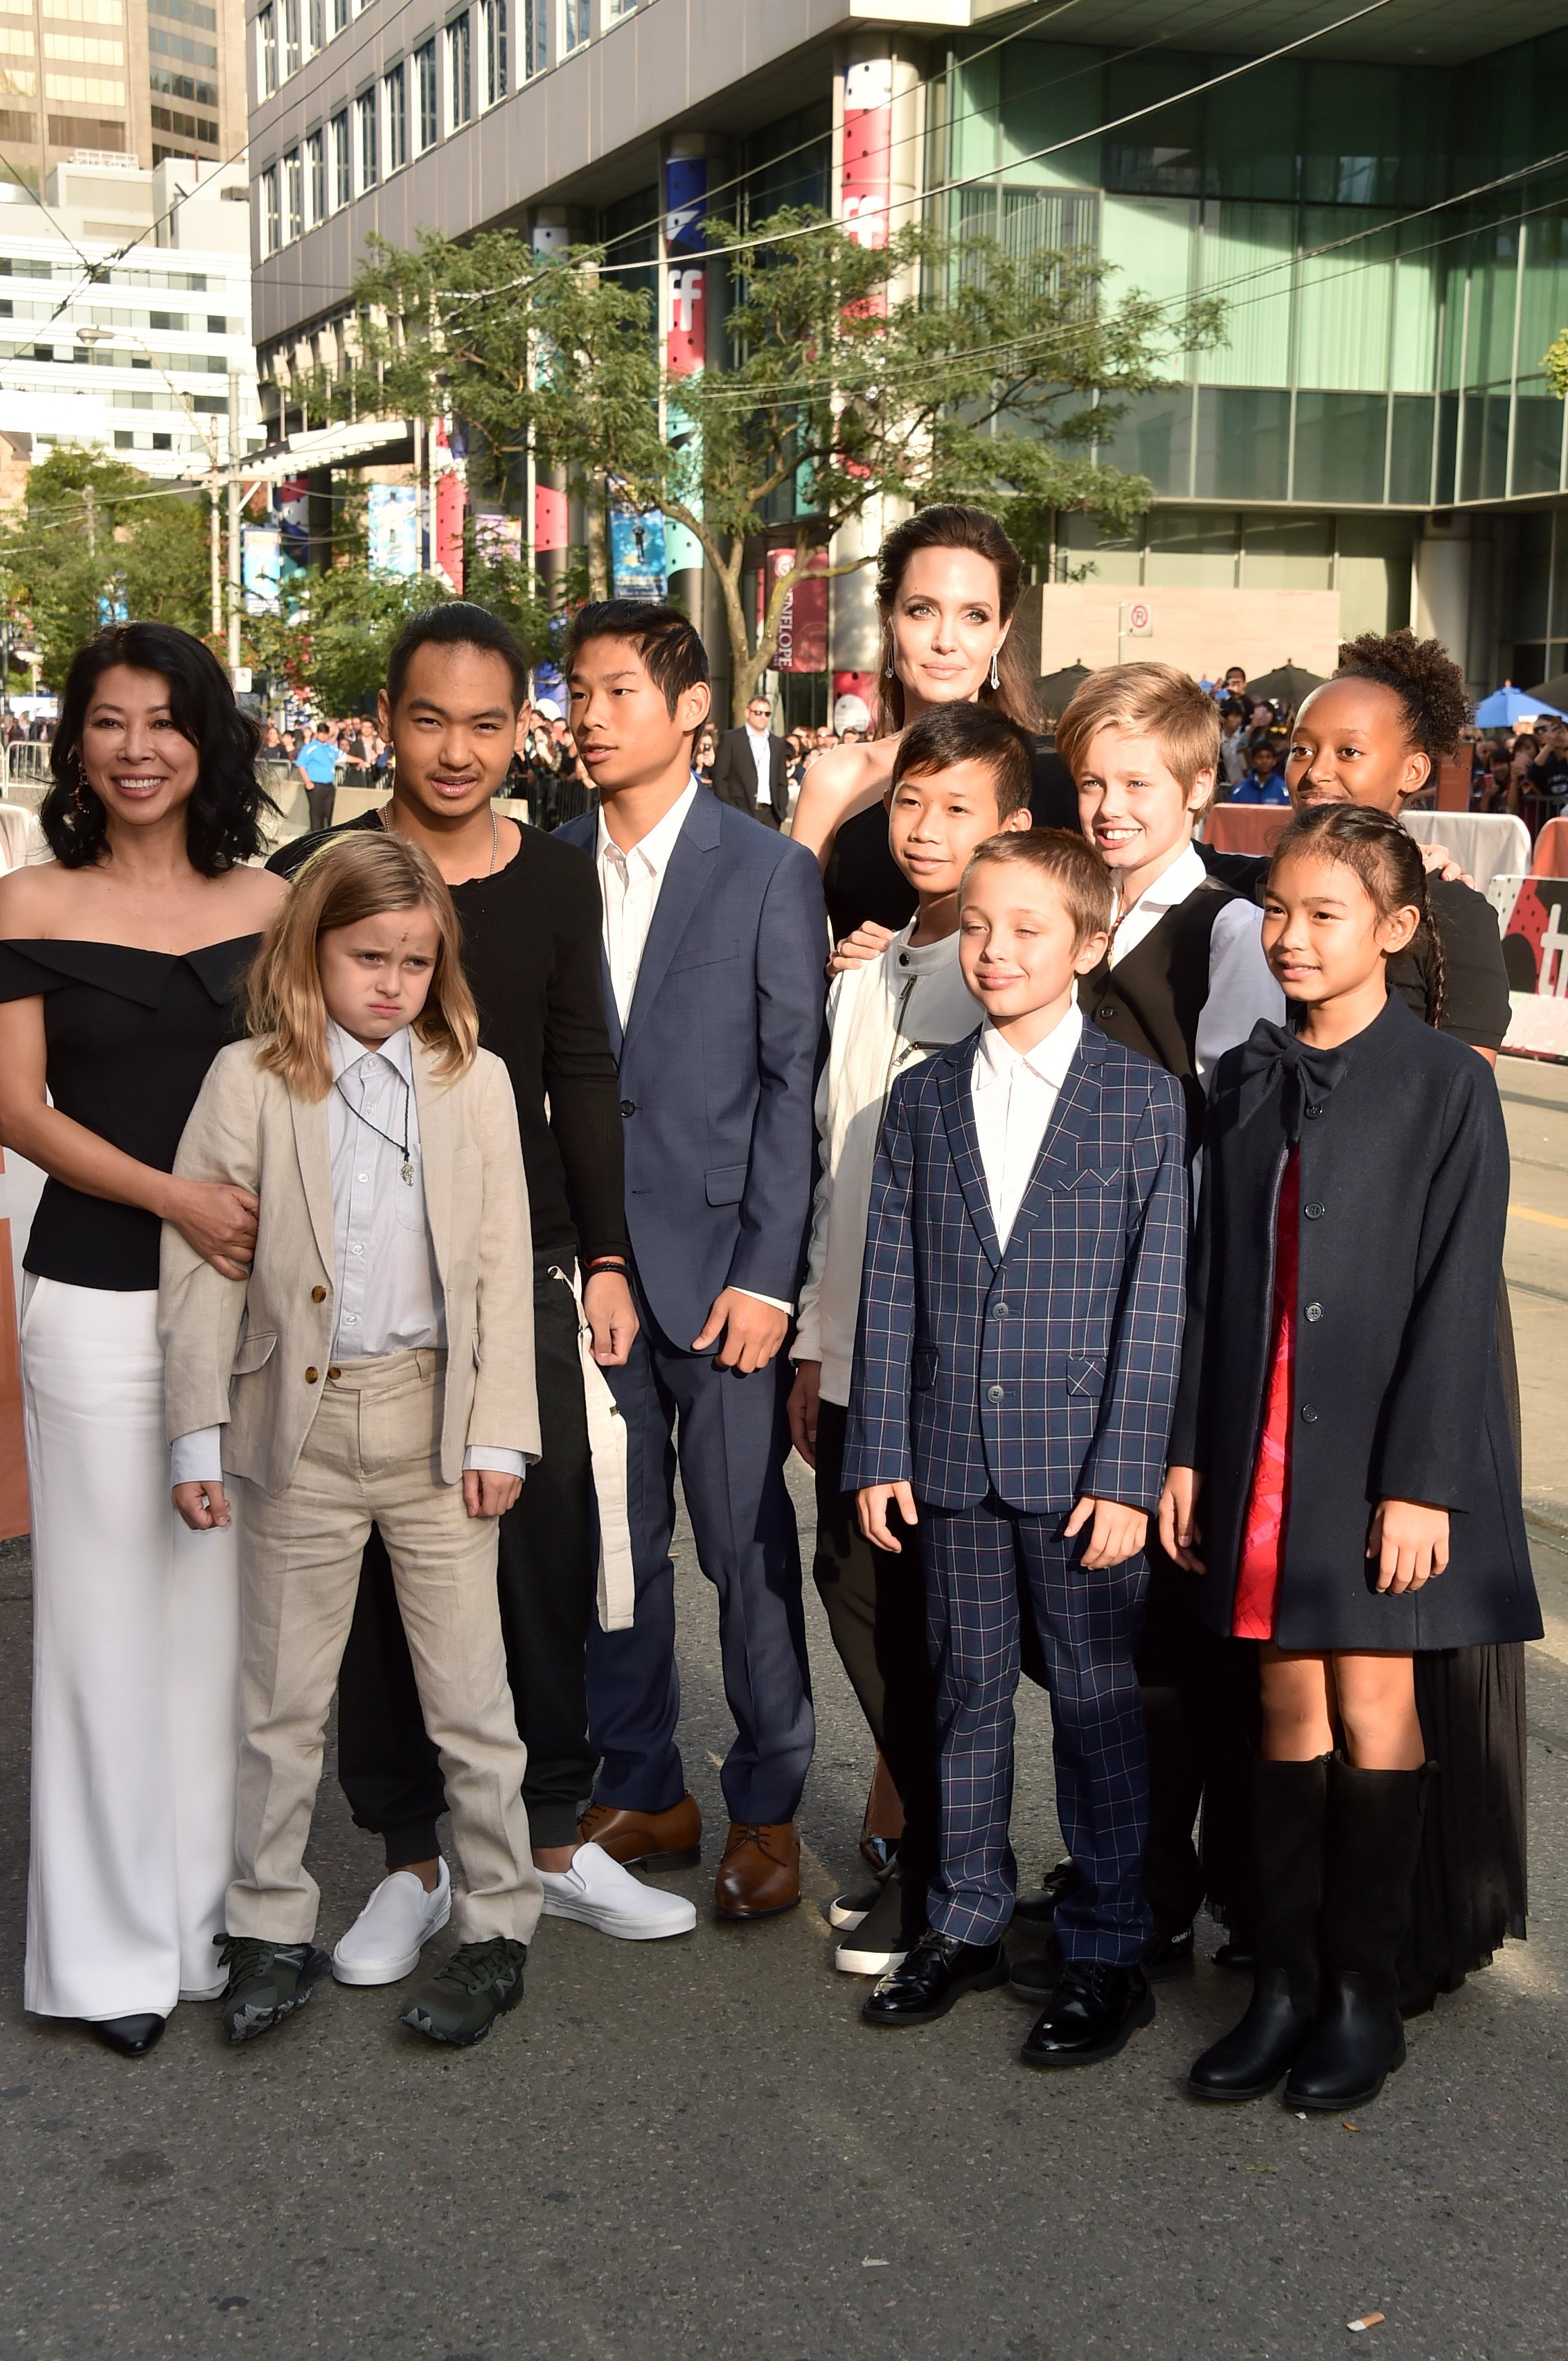 Loung Ung, Vivienne Jolie-Pitt, Maddox Jolie-Pitt, Pax Jolie-Pitt, Angelina Jolie, Kimhak Mun, Knox Jolie-Pitt, Shiloh Jolie-Pitt, Zahara Jolie-Pitt and Sareum Srey Moch attend the "First They Killed My Father" premiere during the 2017 Toronto International Film Festival at Princess of Wales Theatre on September 11, 2017 in Toronto, Canada. | Source: Getty Images